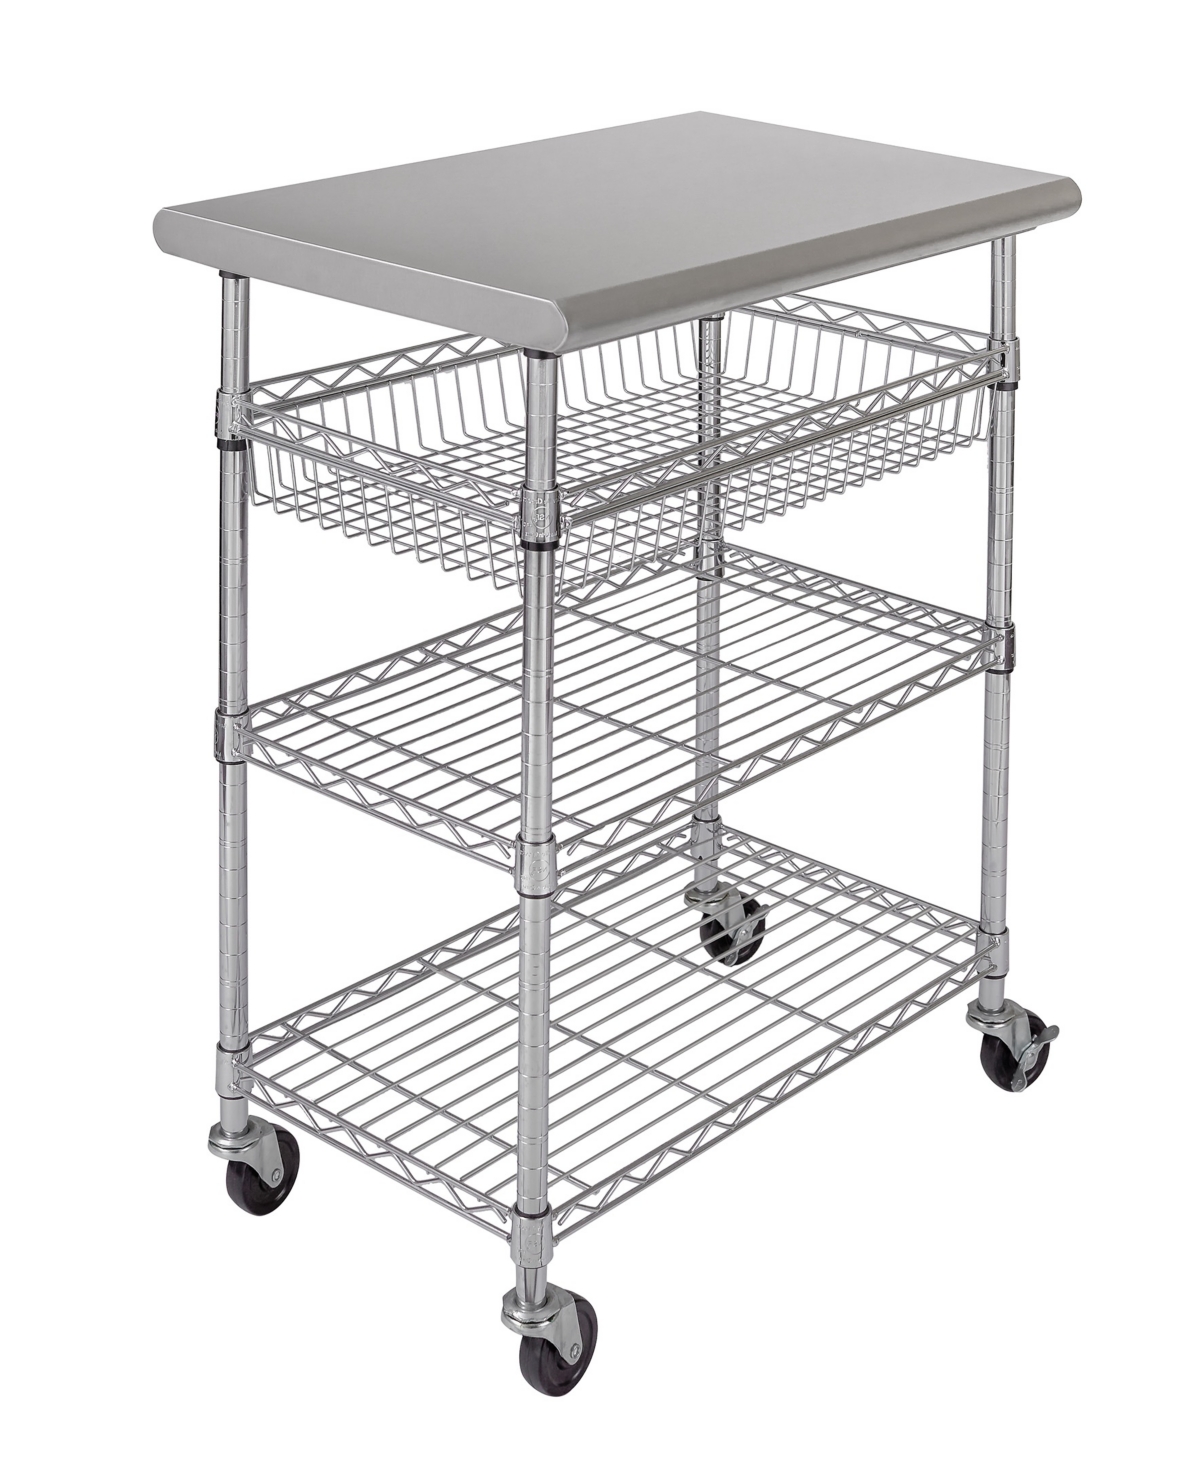 Stainless-Steel Top Utility Cart, Nsf Certified - Stainless Steel